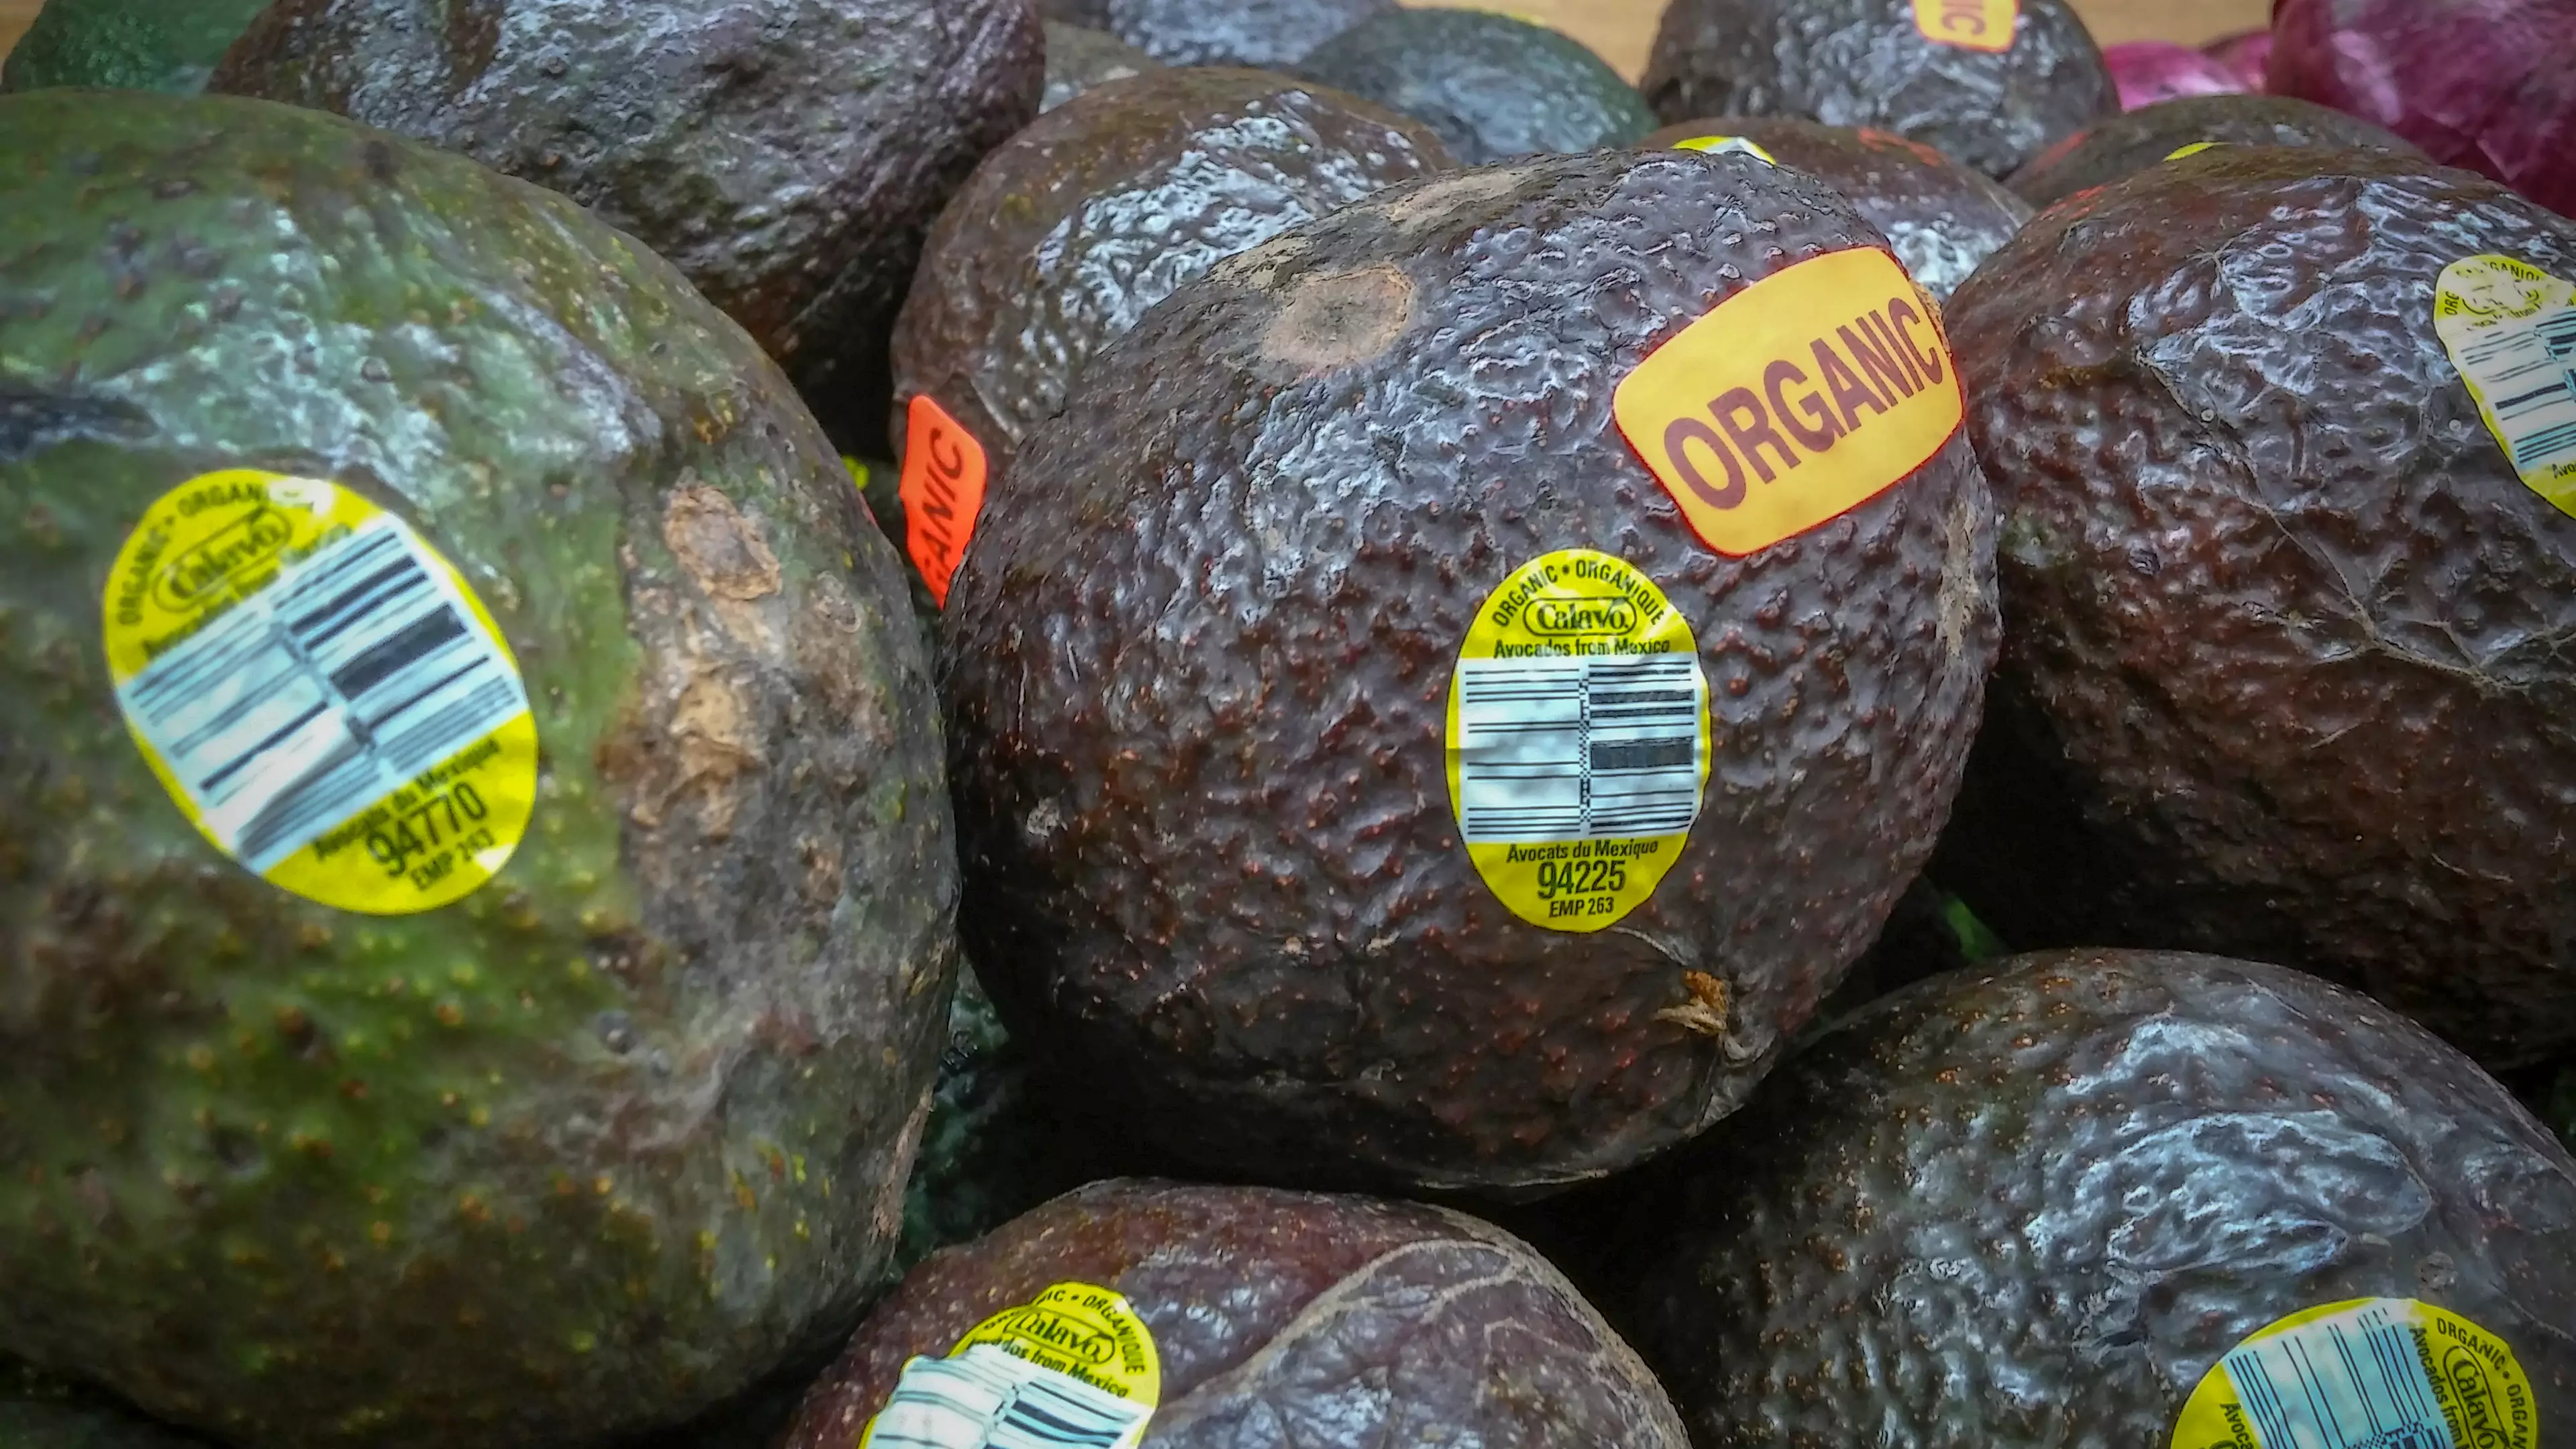 You Should Be Washing Avocados Before Eating Them To Avoid Contamination, Study Finds 